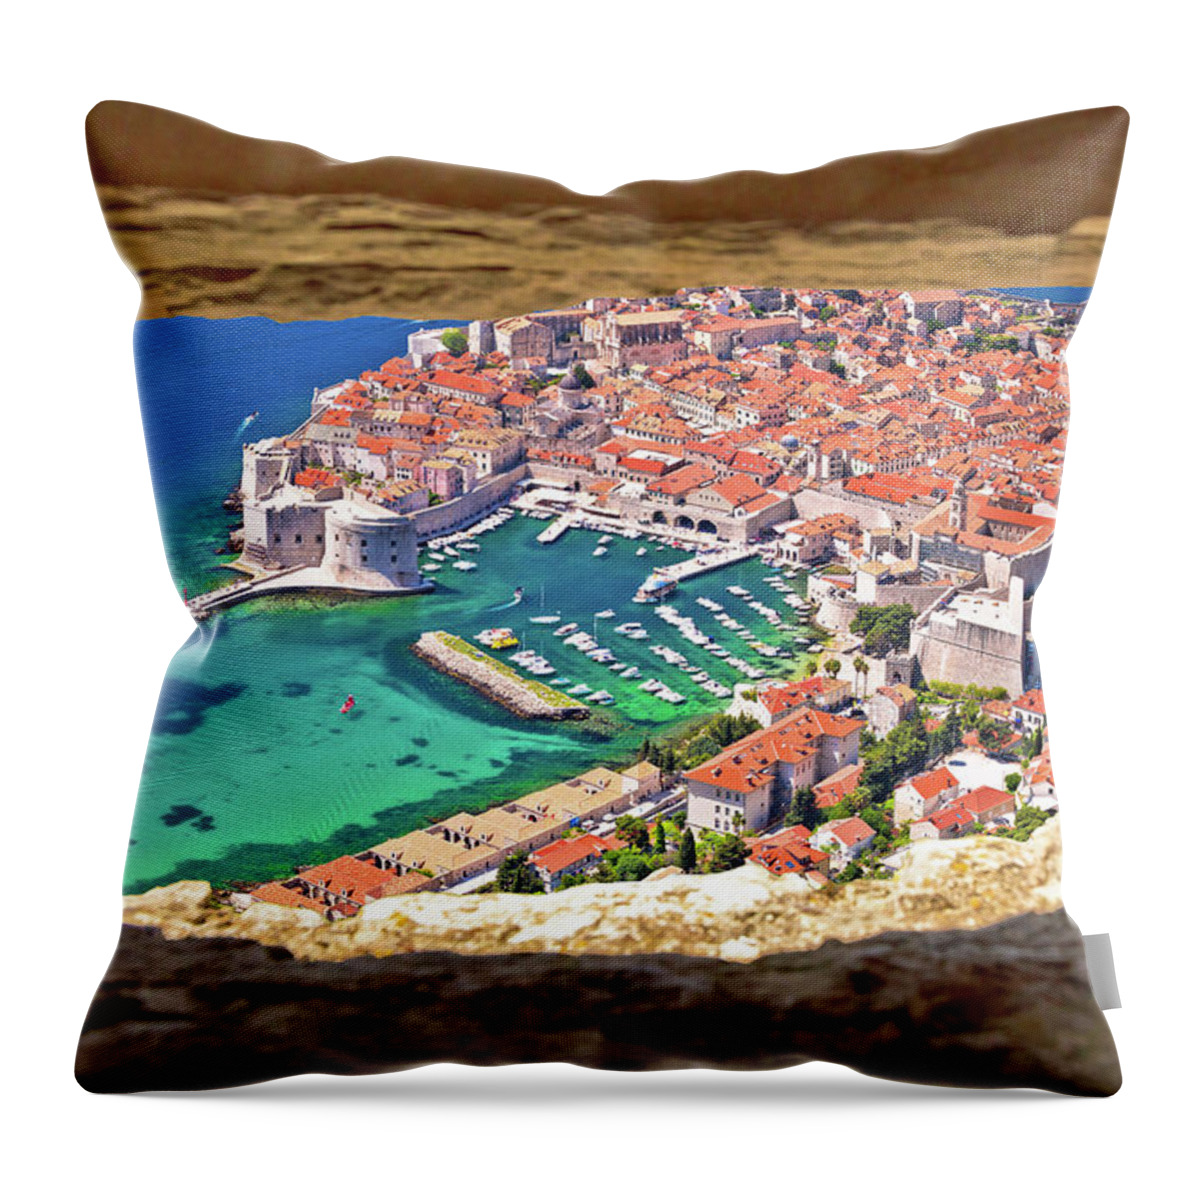 Dubrovnik Throw Pillow featuring the photograph Dubrovnik historic city and harbor aerial view through stone win by Brch Photography